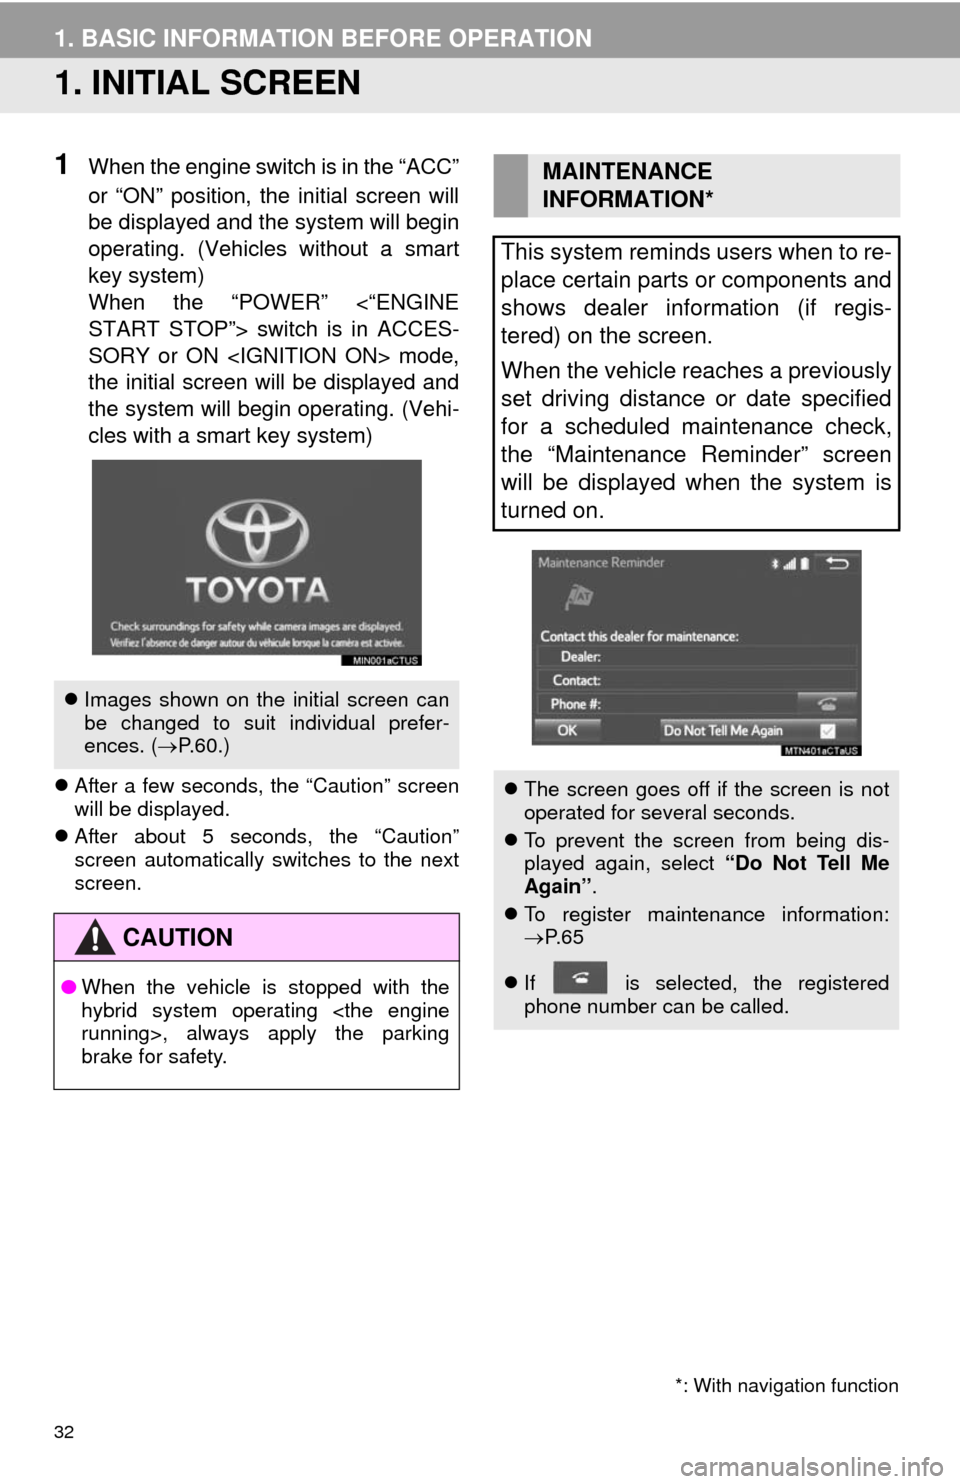 TOYOTA CAMRY 2014 XV50 / 9.G Navigation Manual 32
1. BASIC INFORMATION BEFORE OPERATION
1. INITIAL SCREEN
1When the engine switch is in the “ACC”
or “ON” position, the initial screen will
be displayed and the system will begin
operating. (